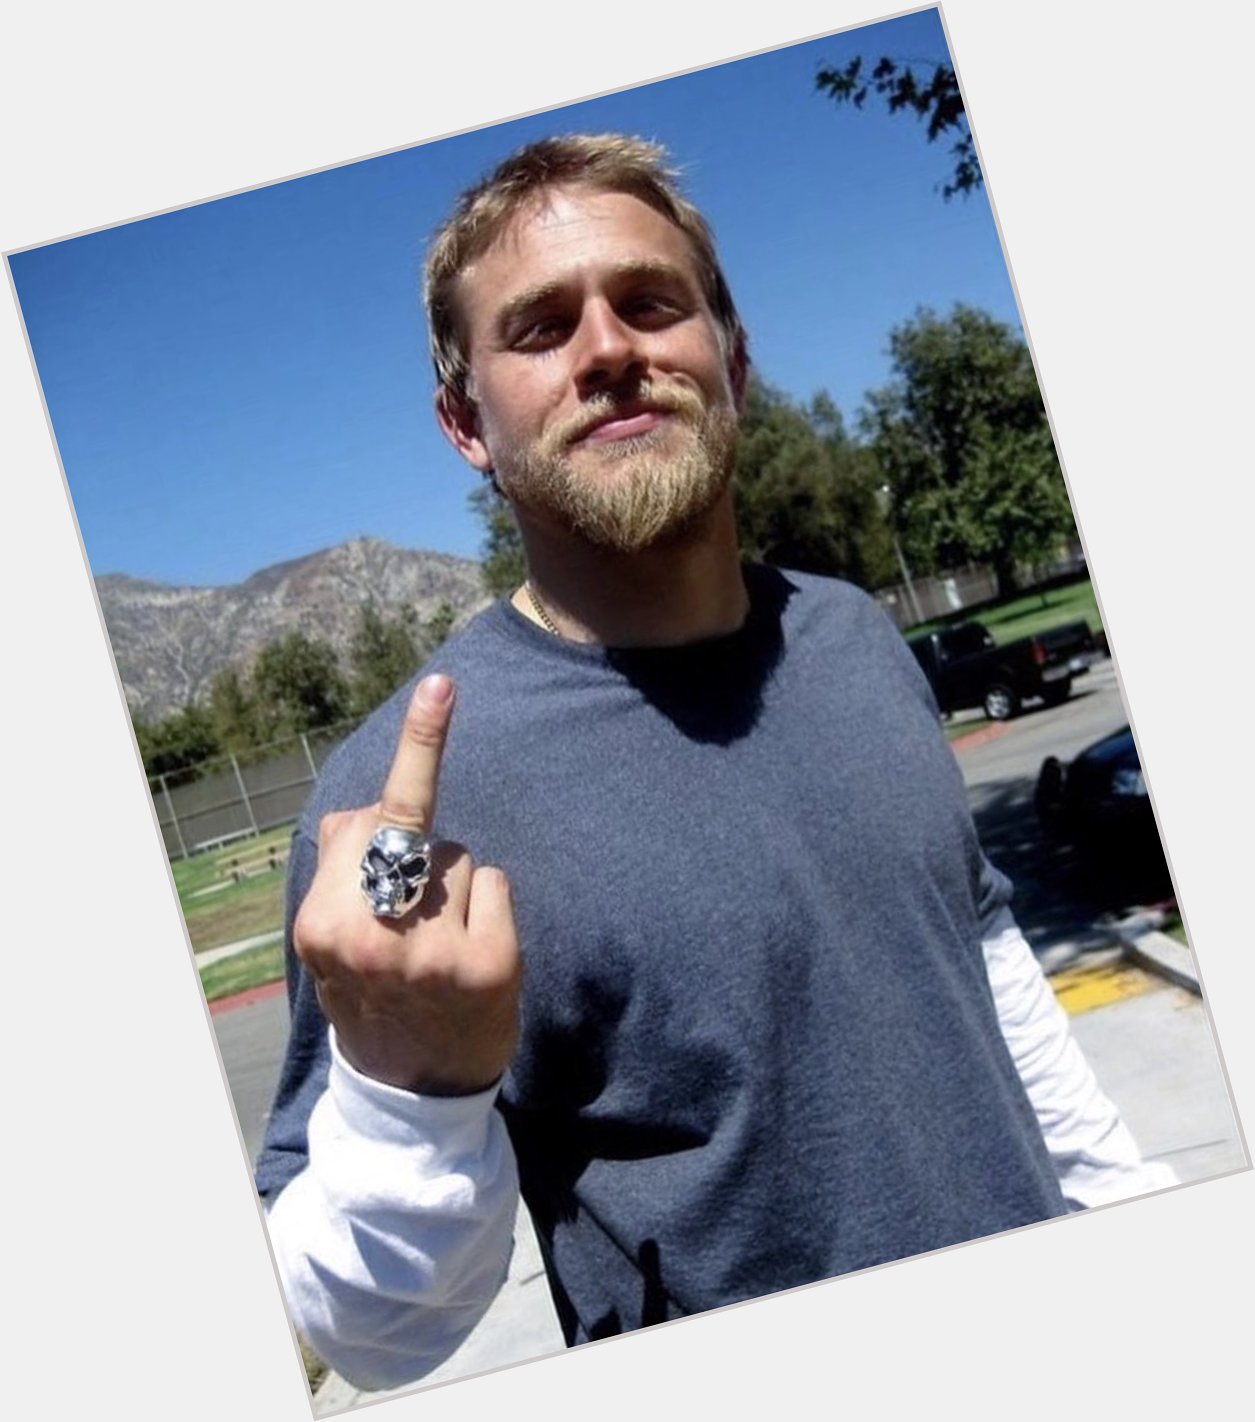 Charlie hunnam only man ever happy birthday babe 